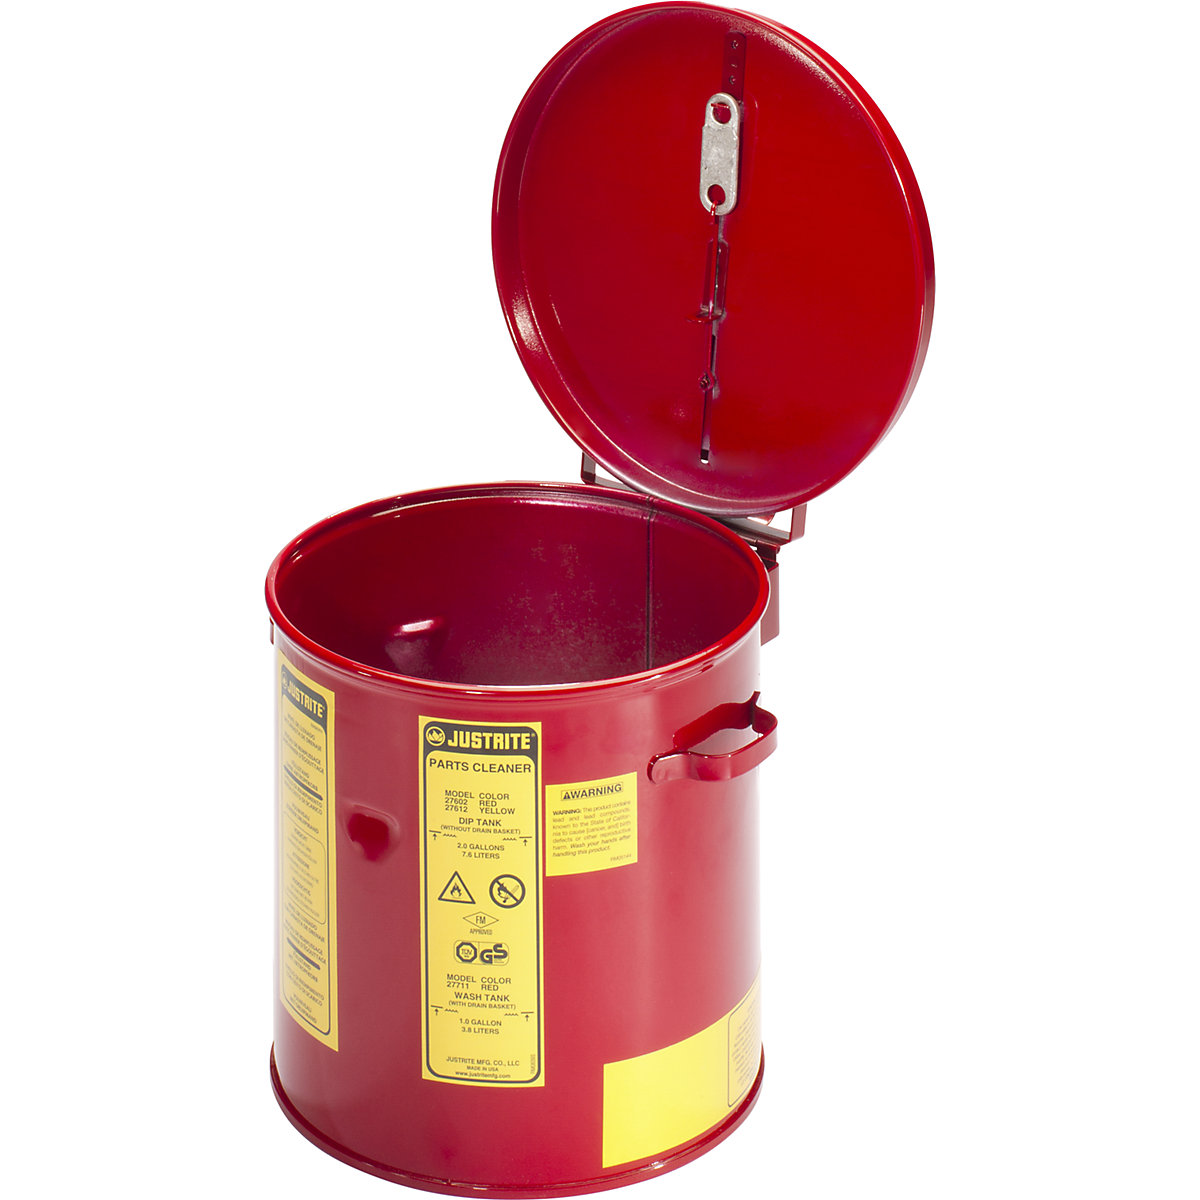 Cleaning and immersion container - Justrite